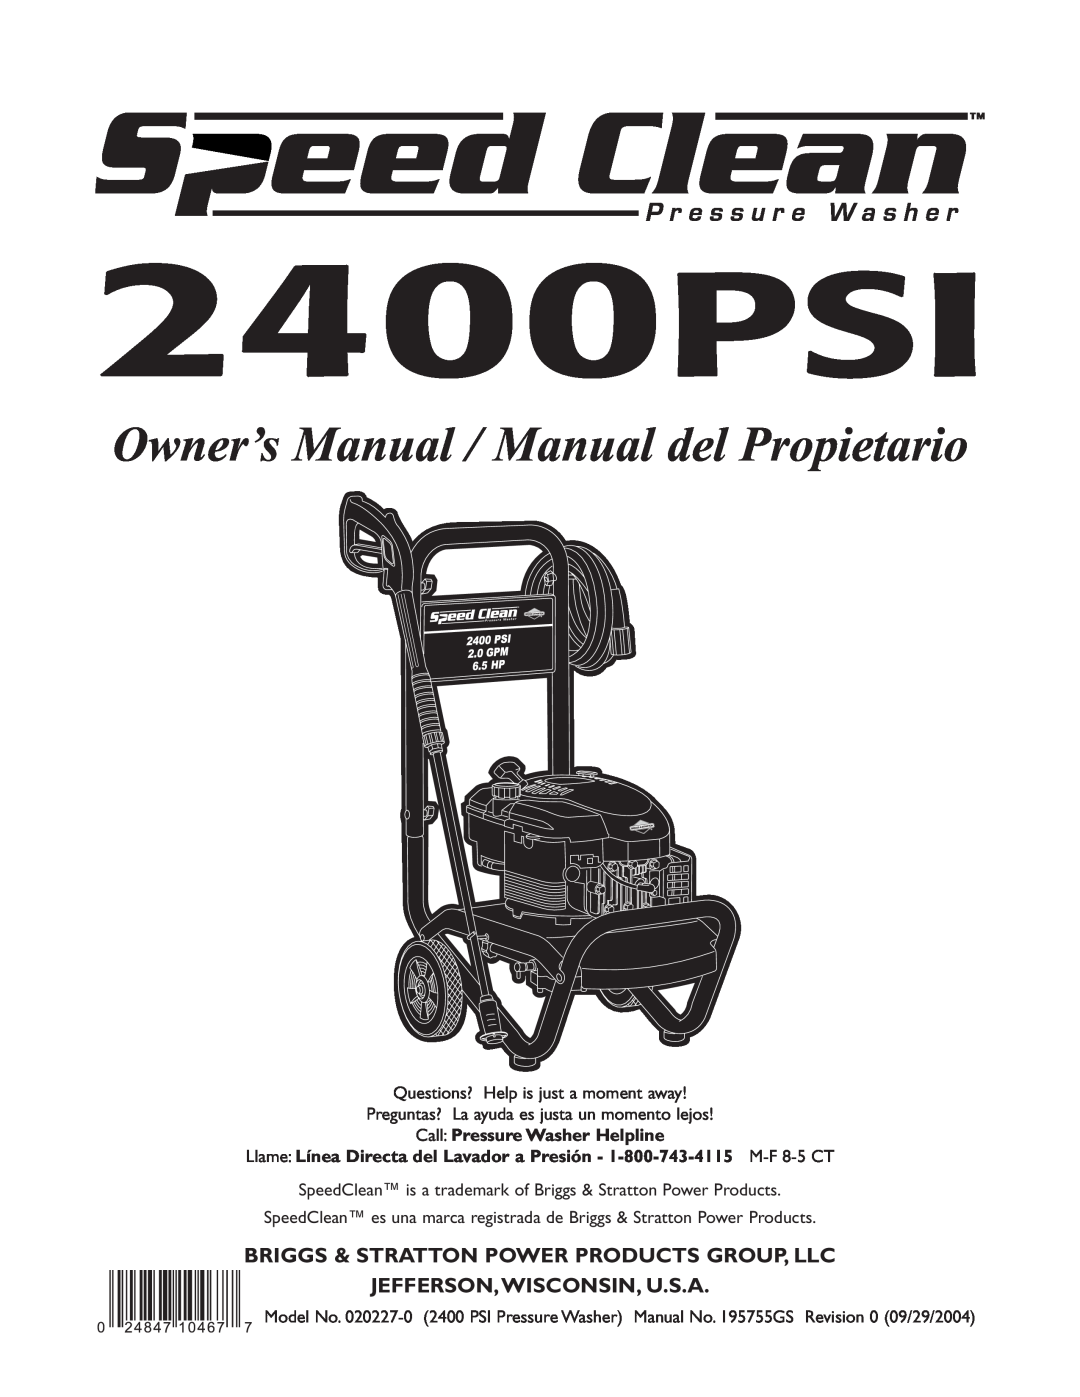 Briggs & Stratton 020227-0 owner manual Briggs & Stratton Power Products Group, Llc, Jefferson,Wisconsin, U.S.A, 2400PSI 